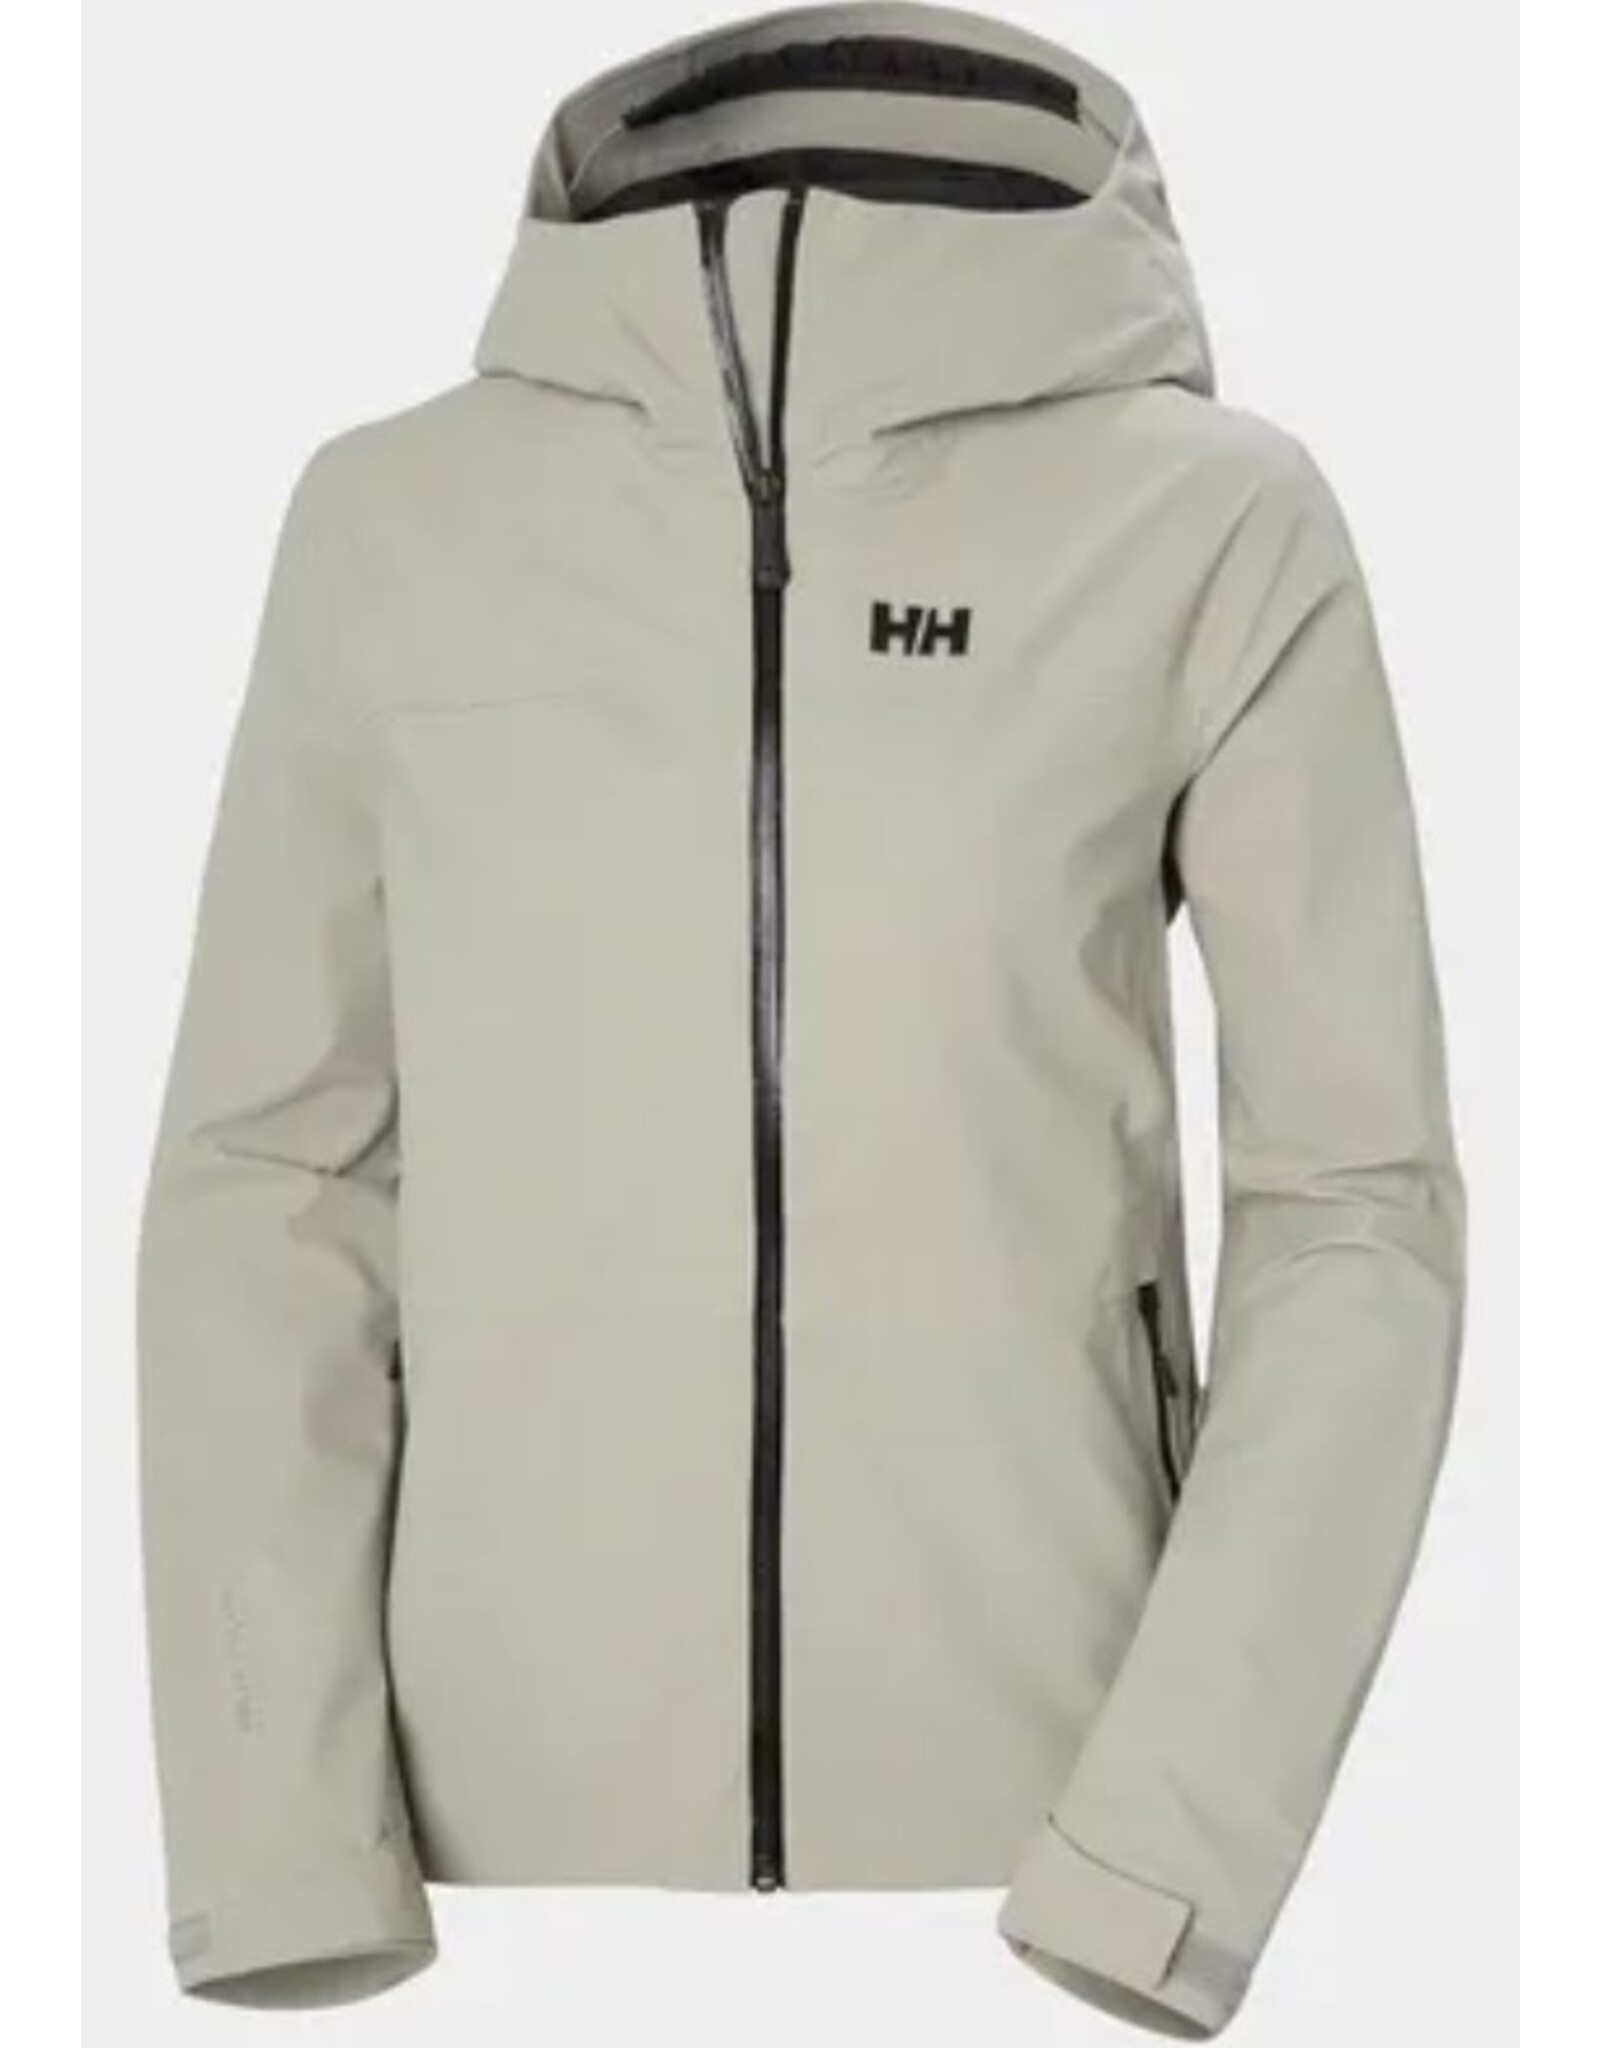 Helly Hansen HH MOTIONISTA 3L SHELL TER